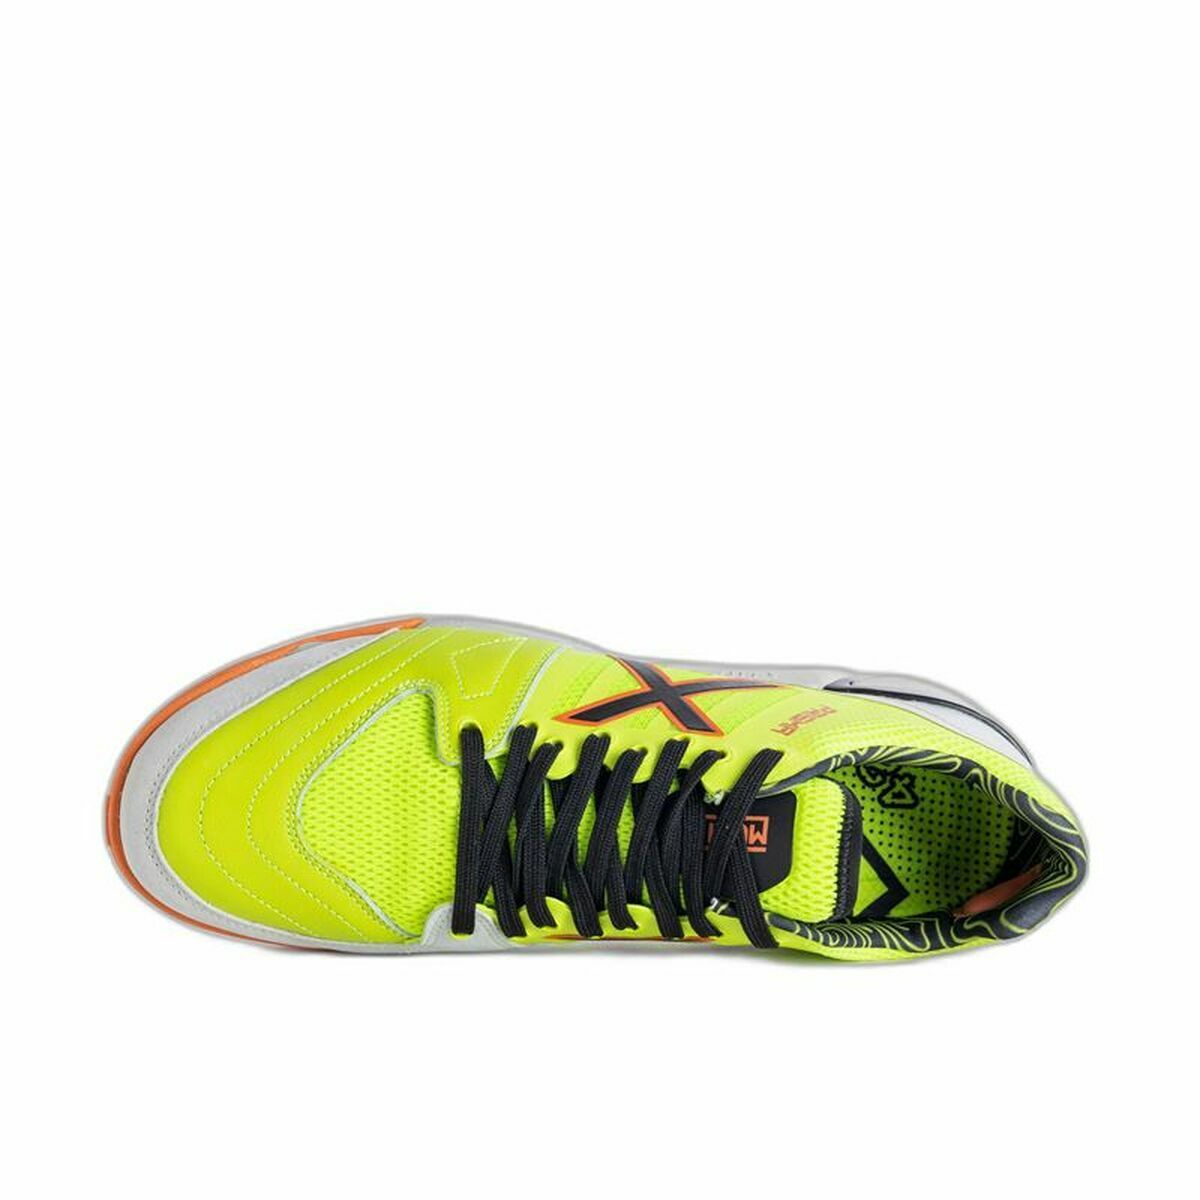 Adult's Indoor Football Shoes Munich Prisma 25 Yellow